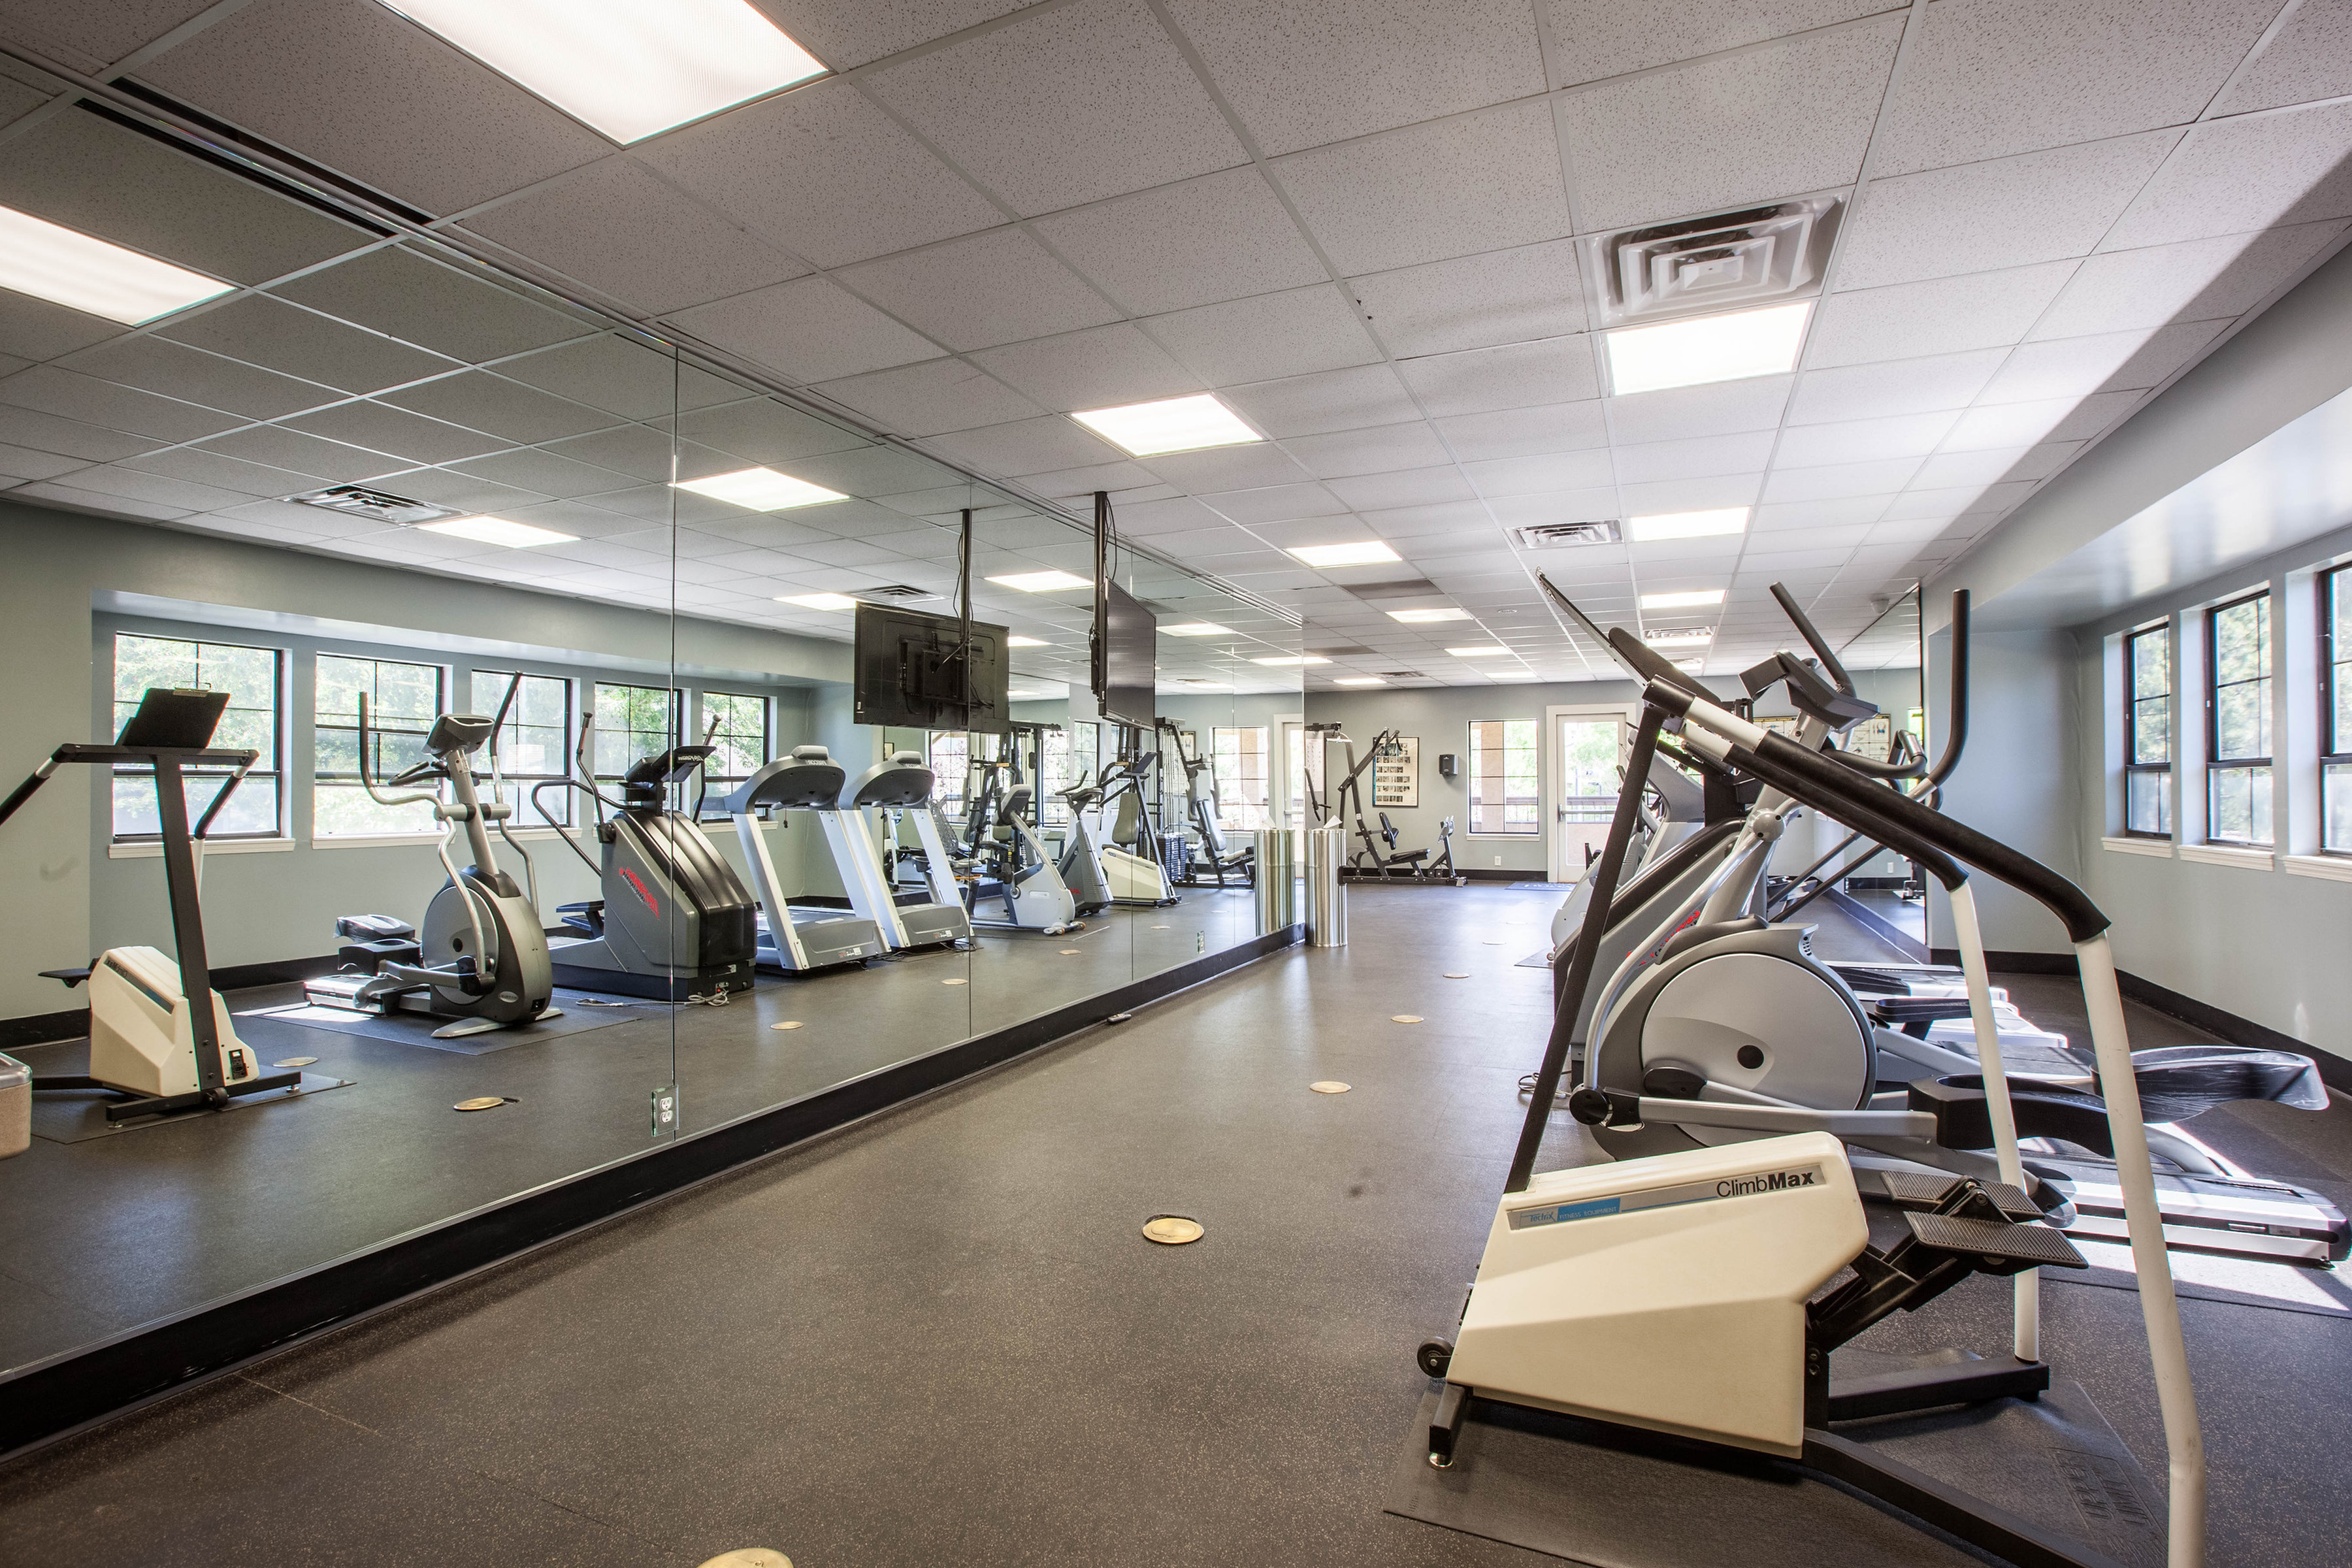 Enjoy Our Fitness Studio, With View of Cardio Machines, Cable Machines, and TV at Cottonwood Apartments